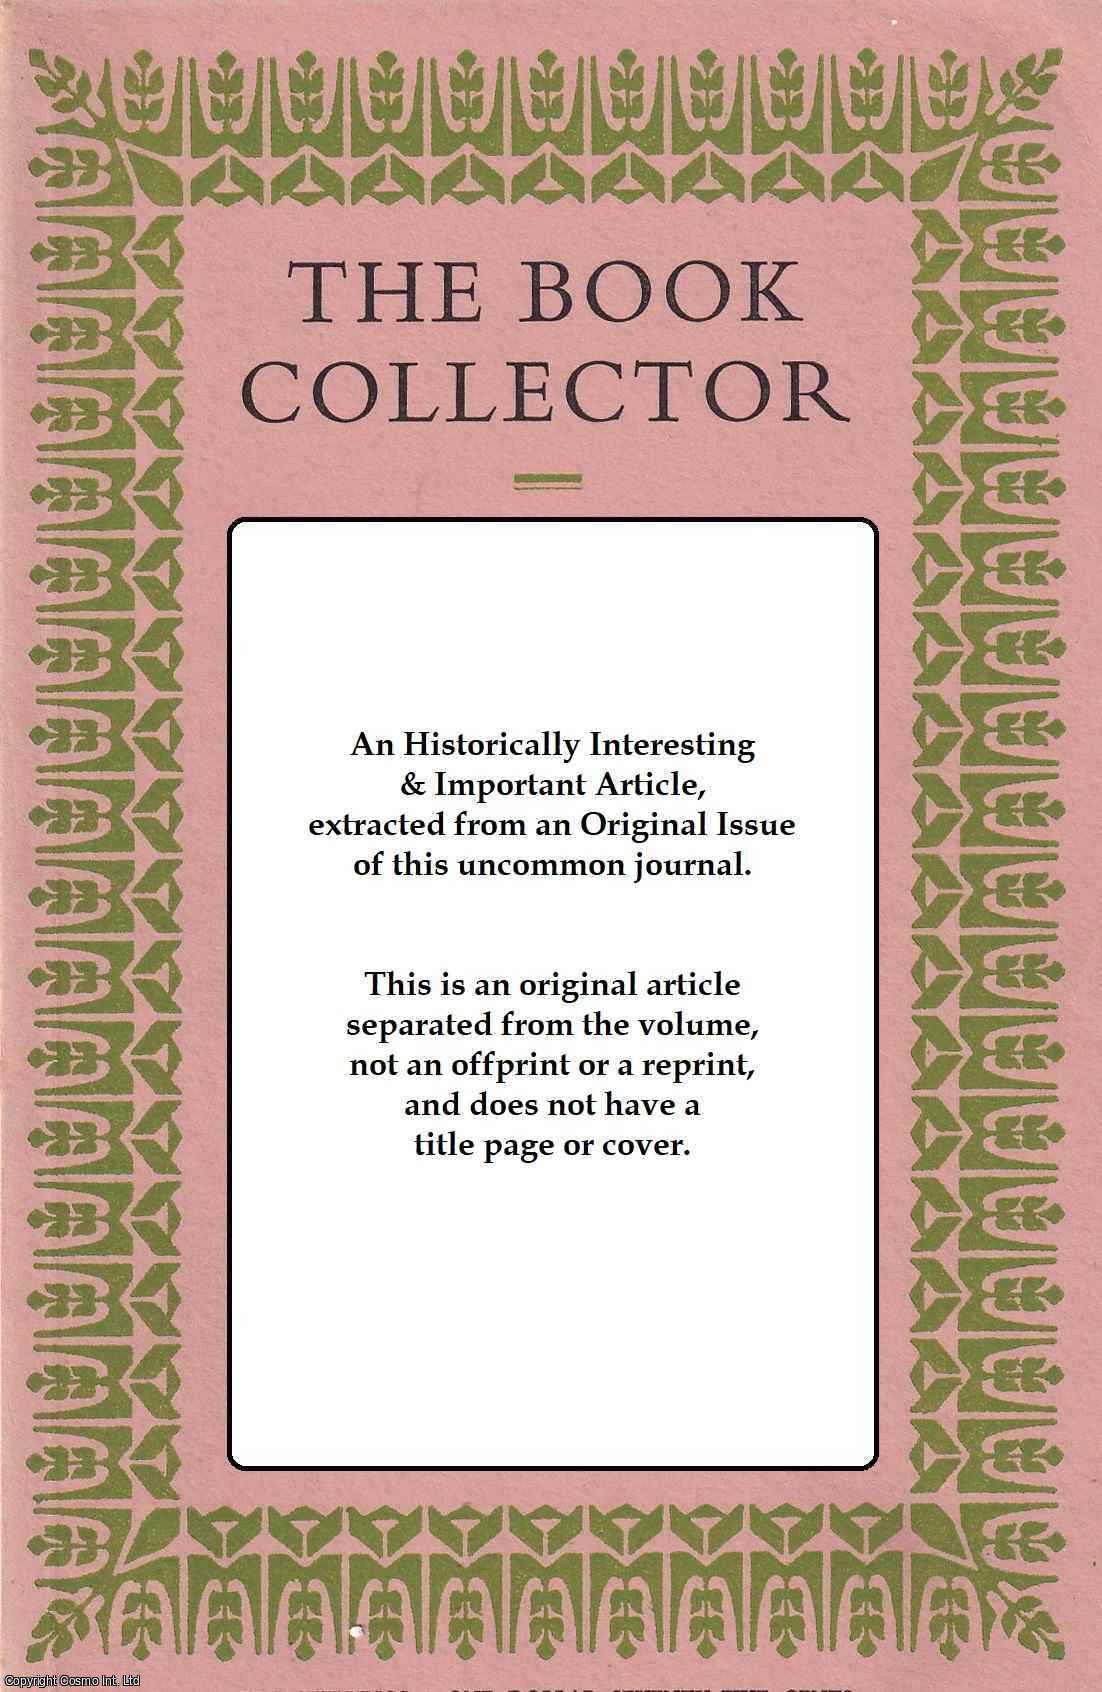 Giles Barber - Continental Paper Wrappers and Publishers' Bindings in The 18th Century. This is an original article separated from an issue of The Book Collector Journal.